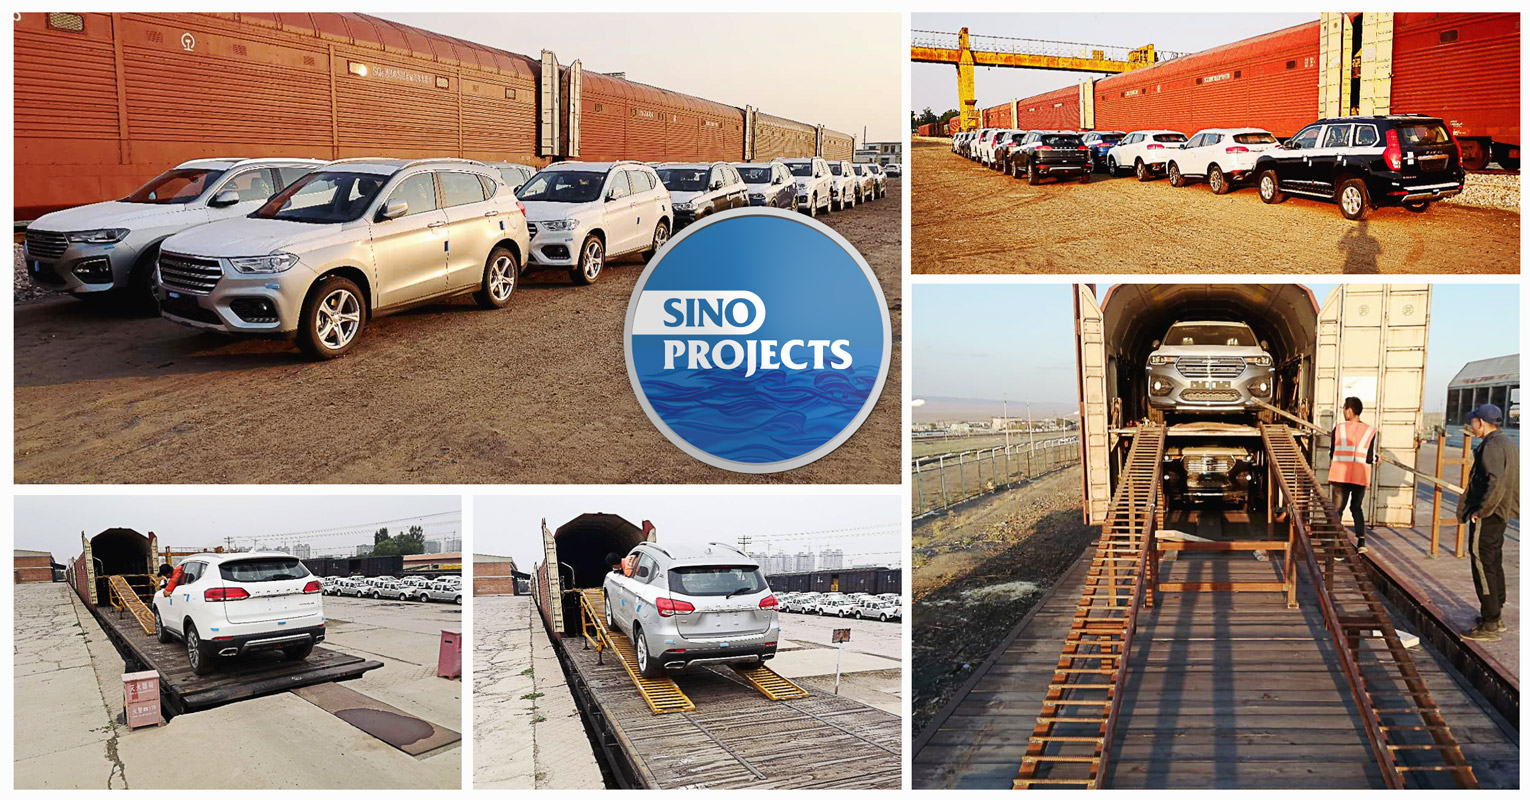 Sino Projects Transported Cars by Rail Car Wagons from China to Central Asia (CIS) Countries